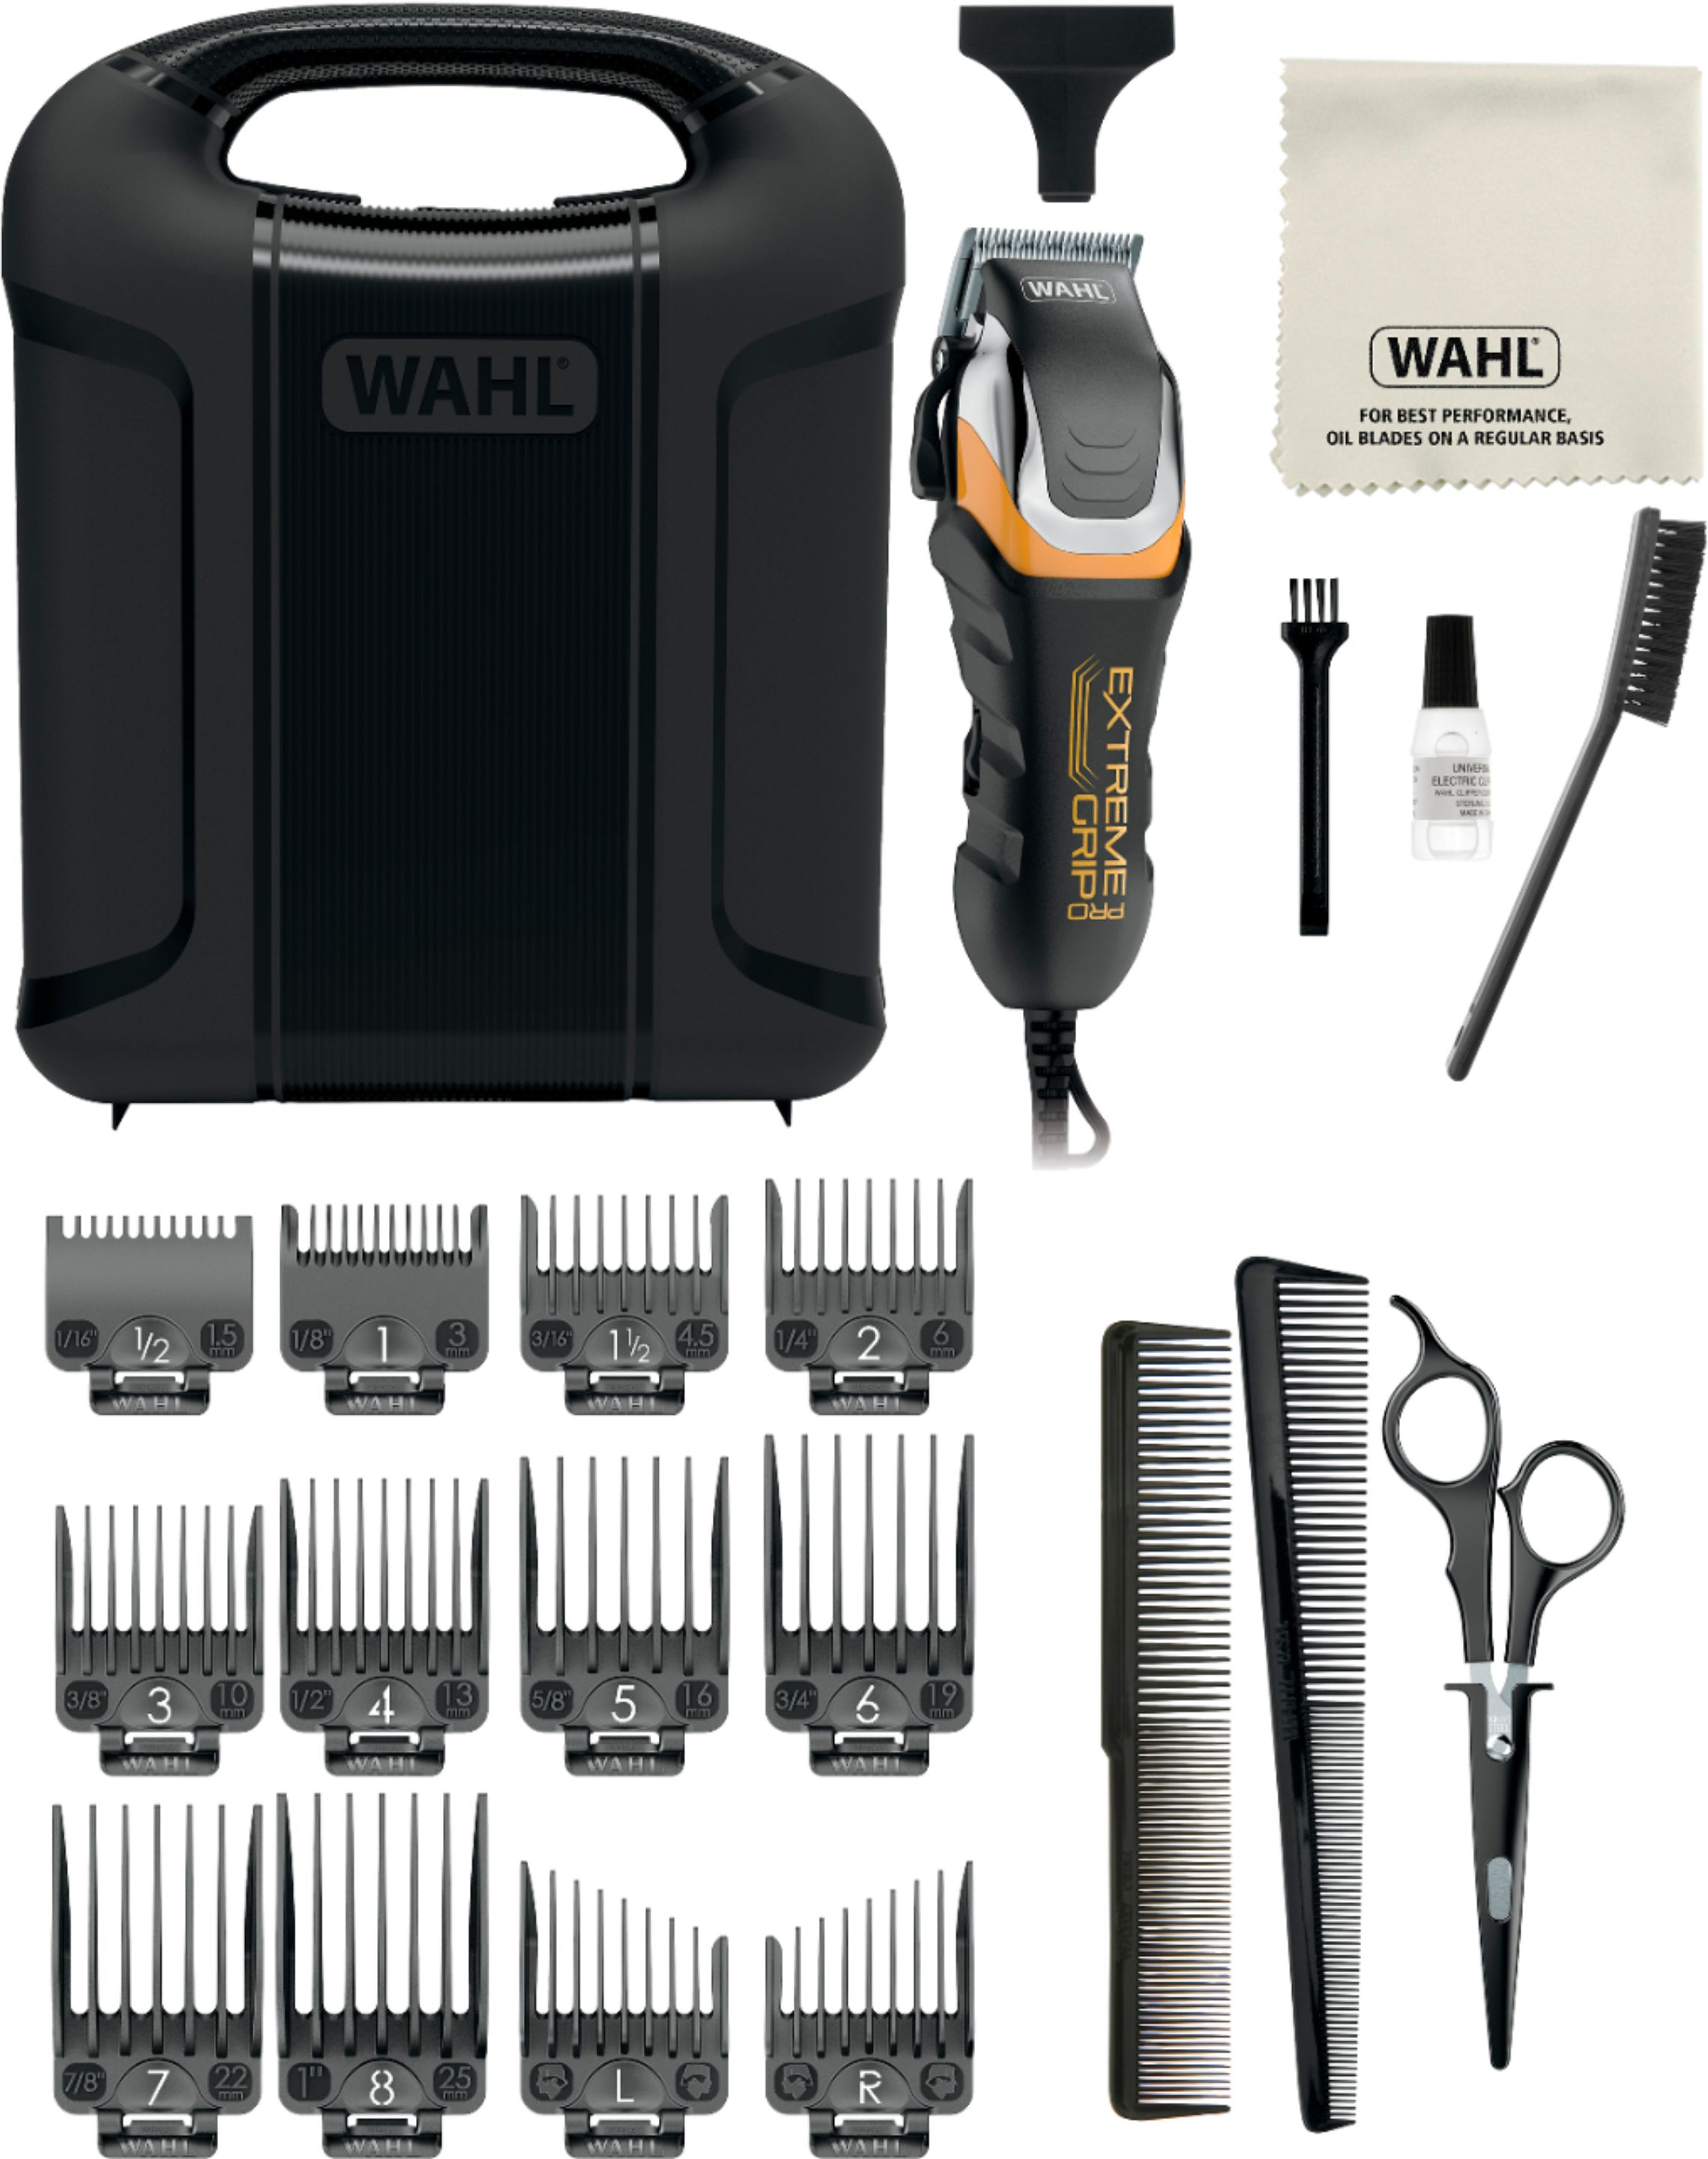 wahl trimmer hair